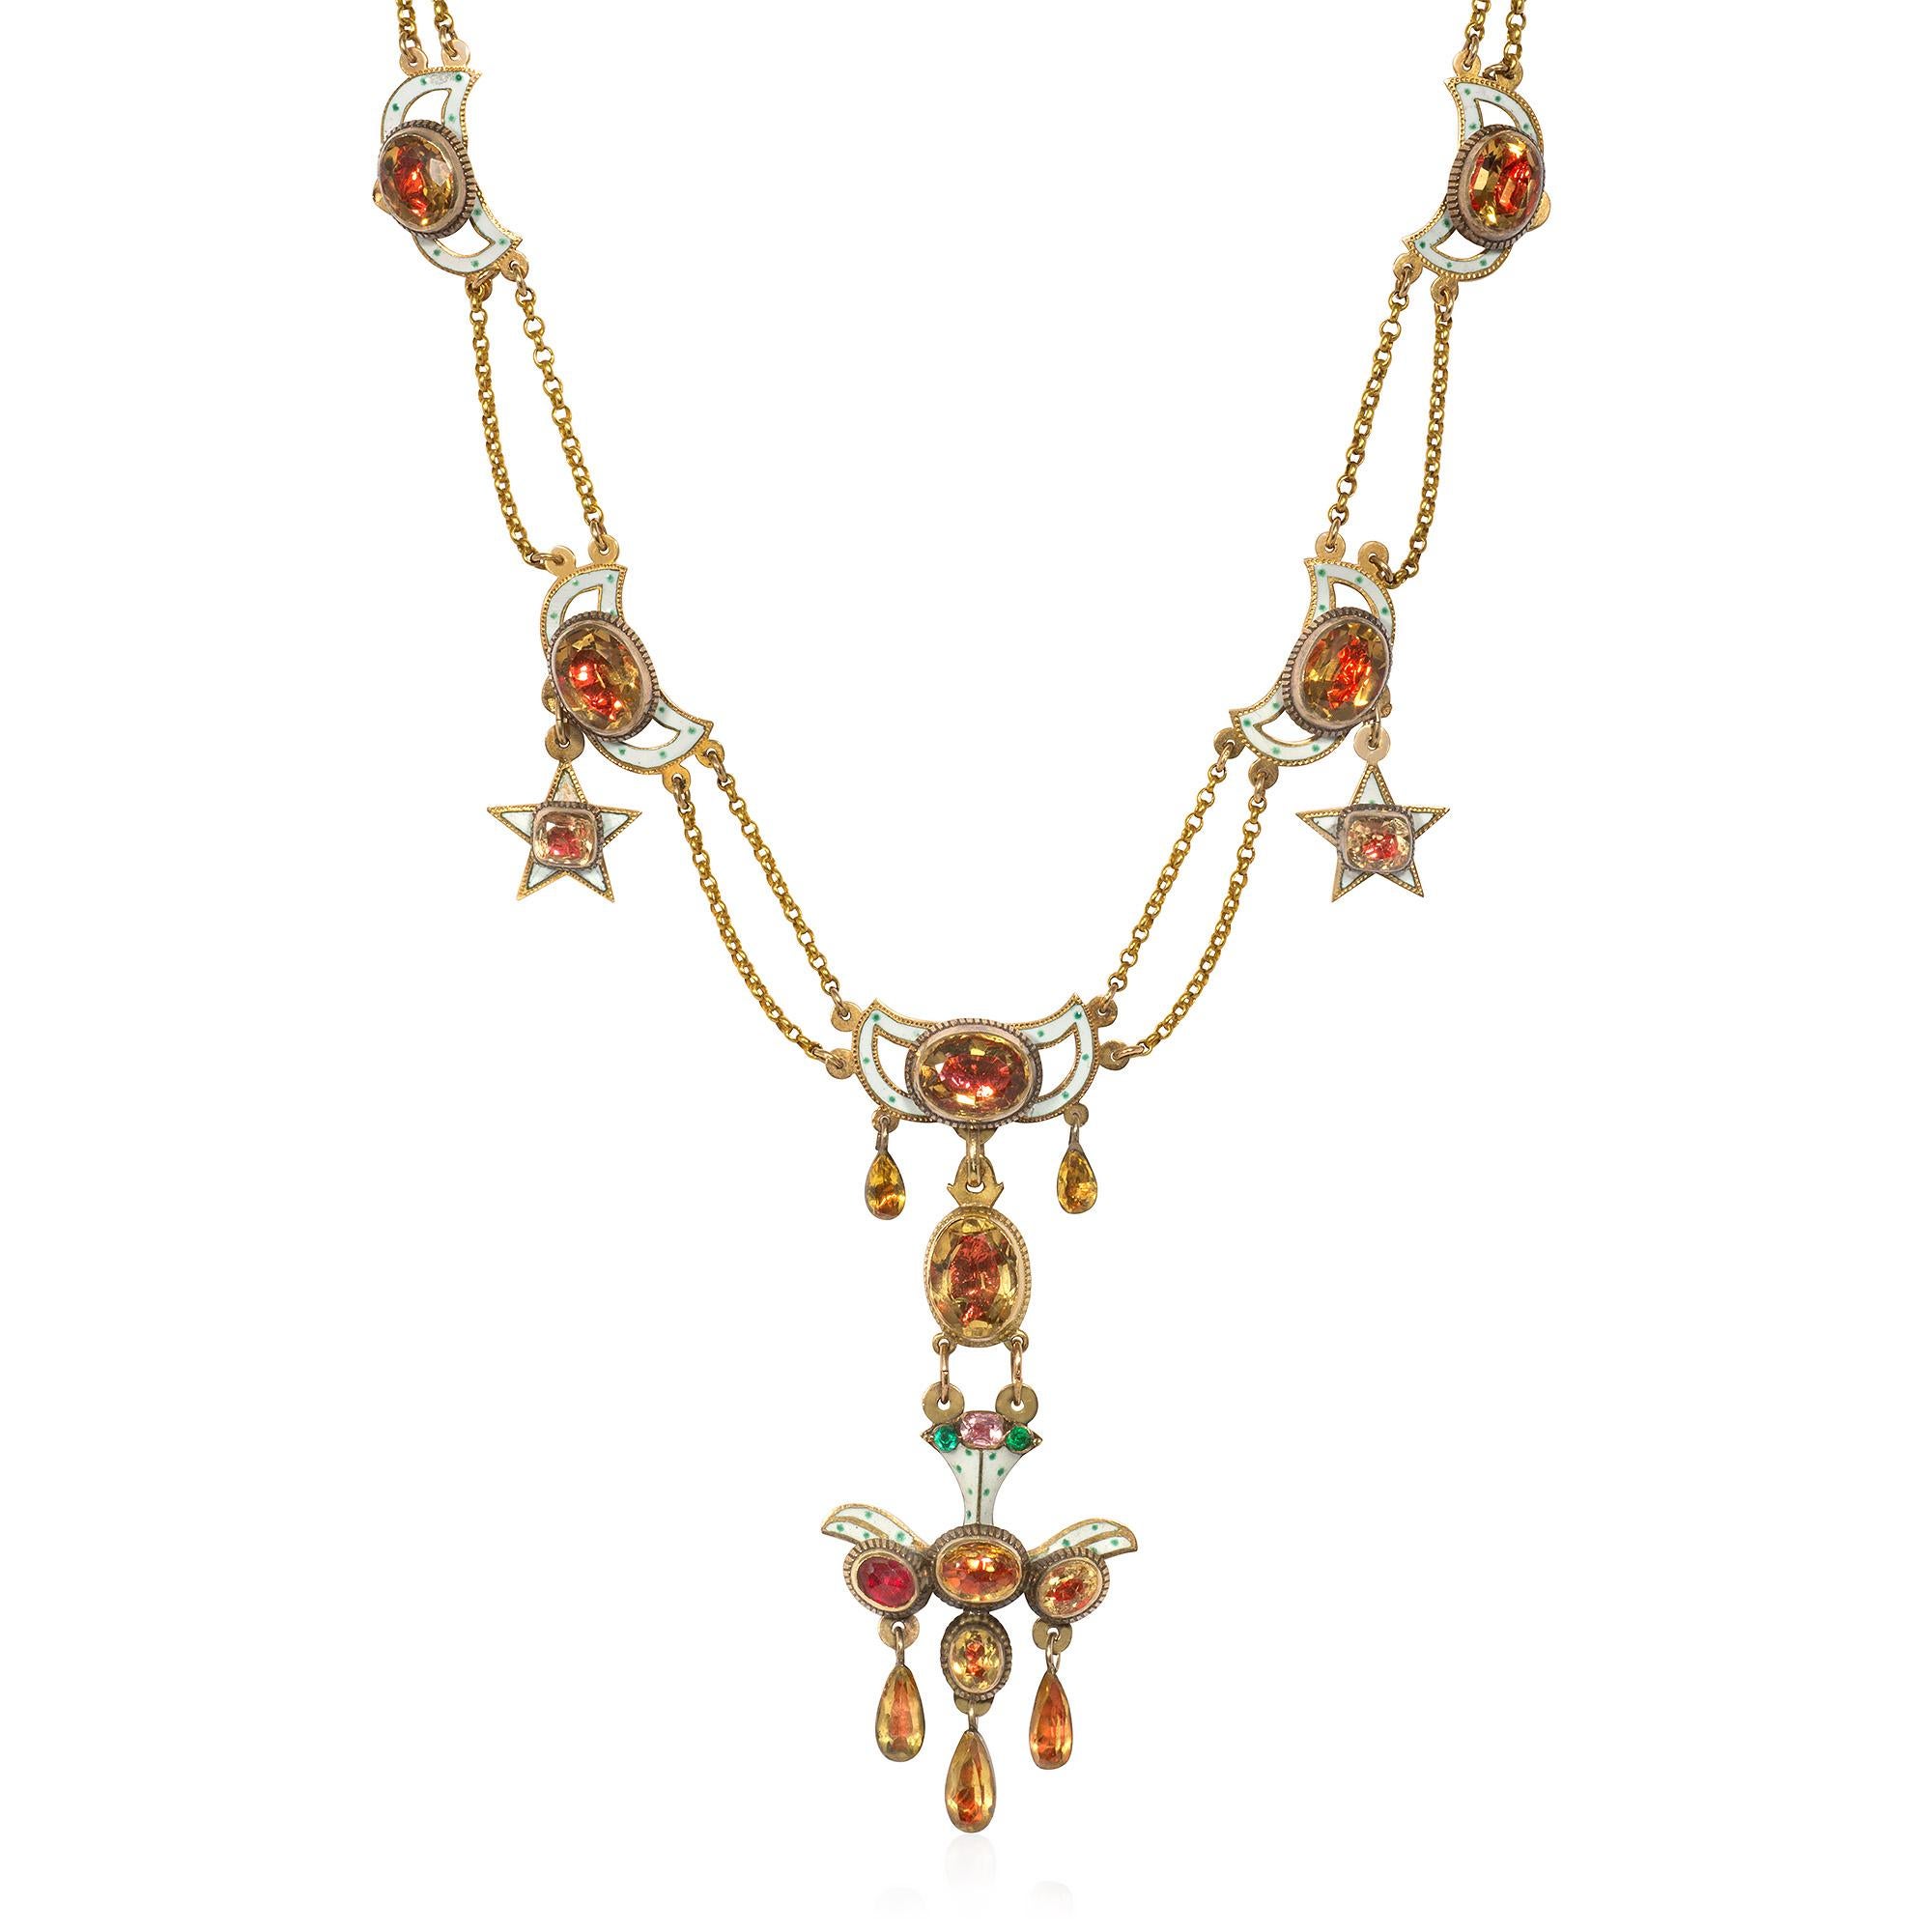 An antique Georgian period gold and foiled citrine festoon necklace comprised of seven winged ornaments with white and green dotted enamel and two star pendants, culminating in a stylized bird pendant set with emeralds and a tourmaline, in 18k. 